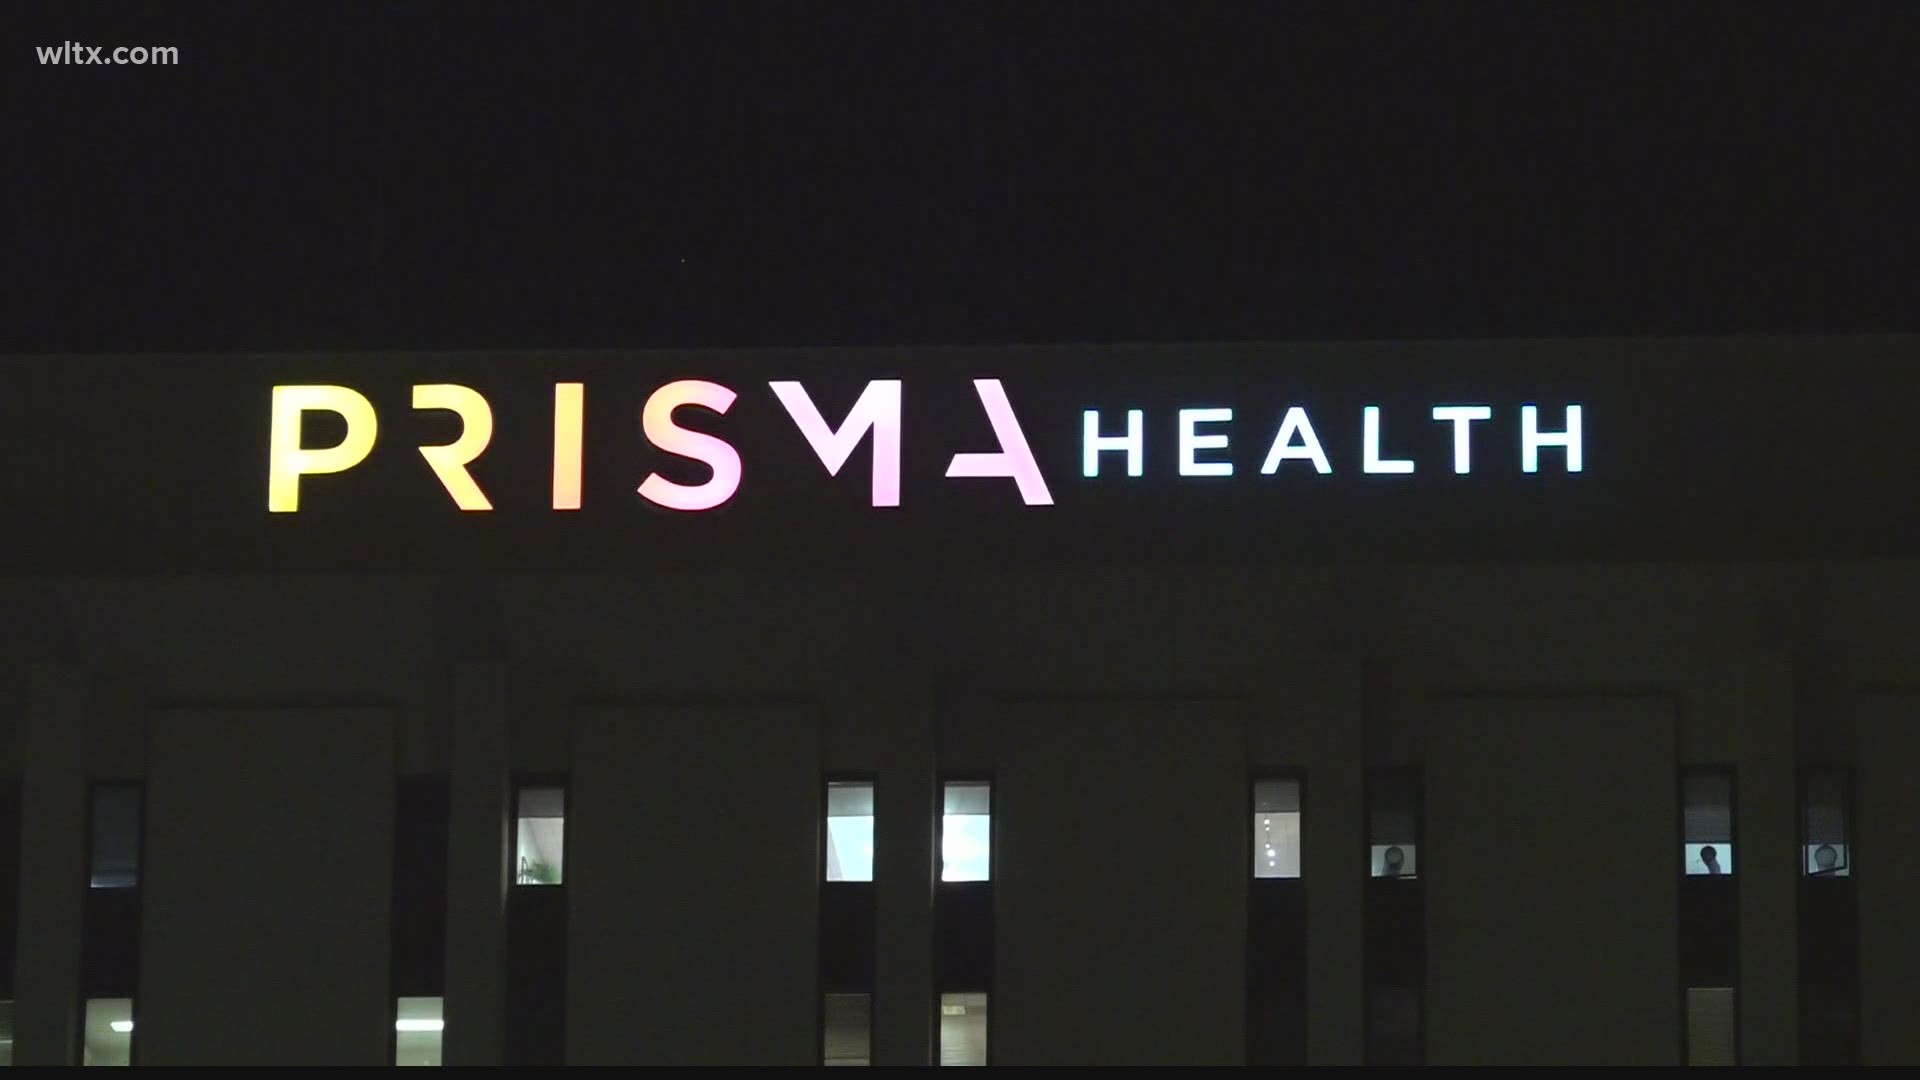 Prisma Health says they'll be one of the first hospital systems in the state to receive COVID-19 vaccinations.